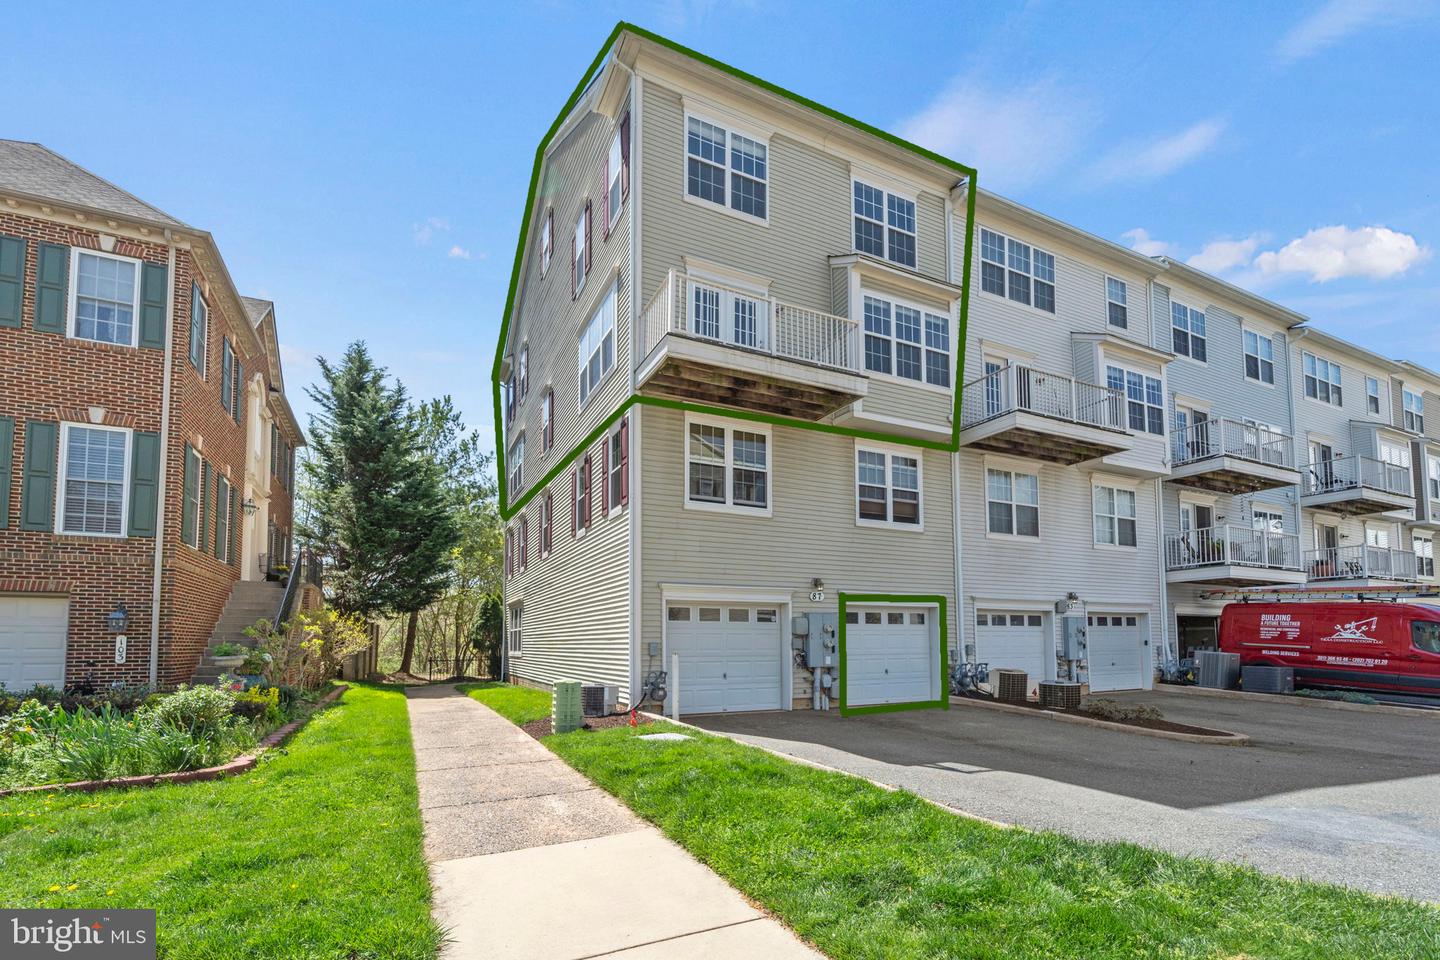 View Gaithersburg, MD 20878 townhome